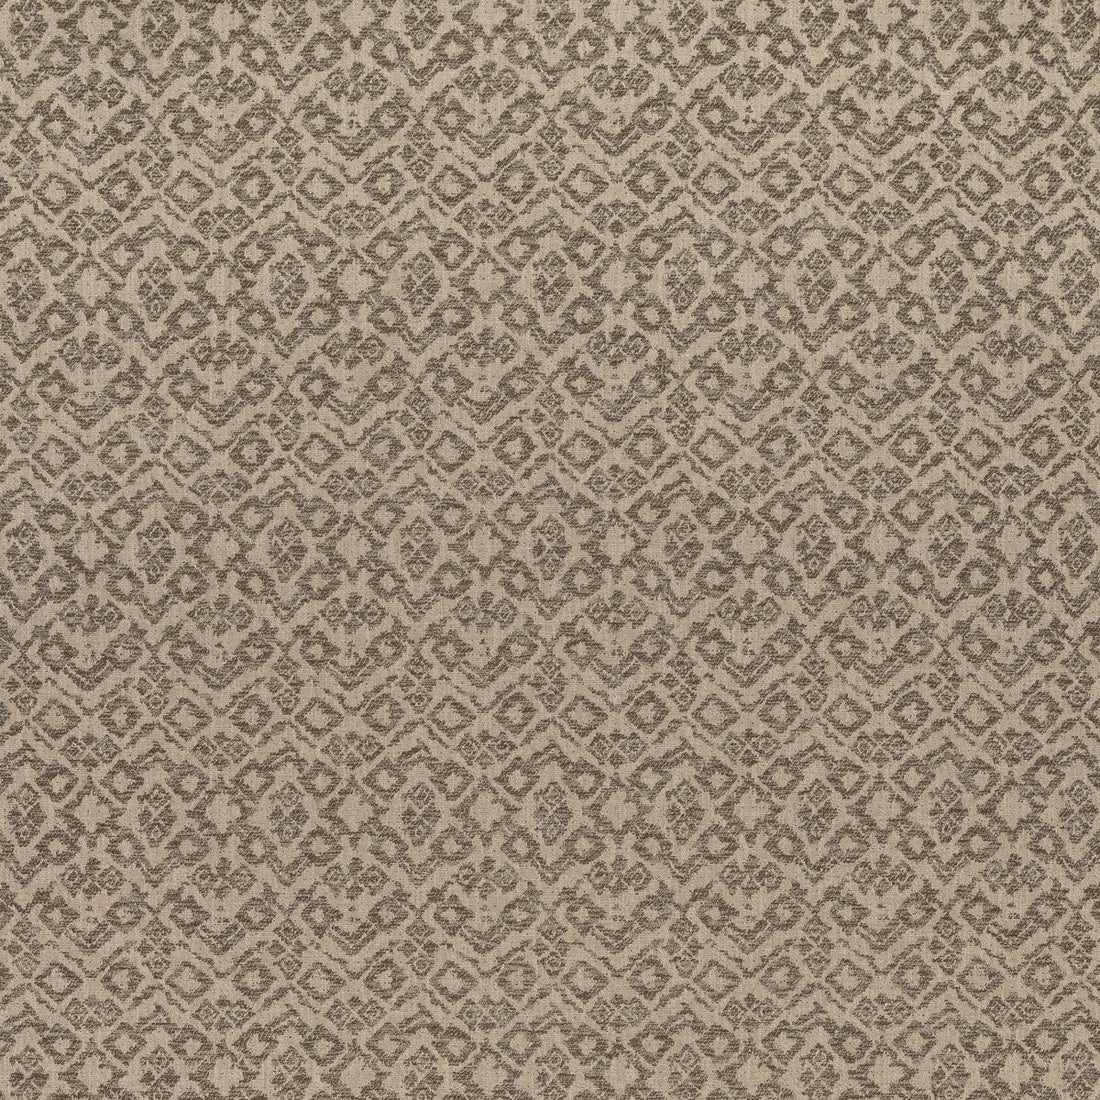 Brooke fabric in taupe color - pattern BFC-3691.106.0 - by Lee Jofa in the Blithfield collection